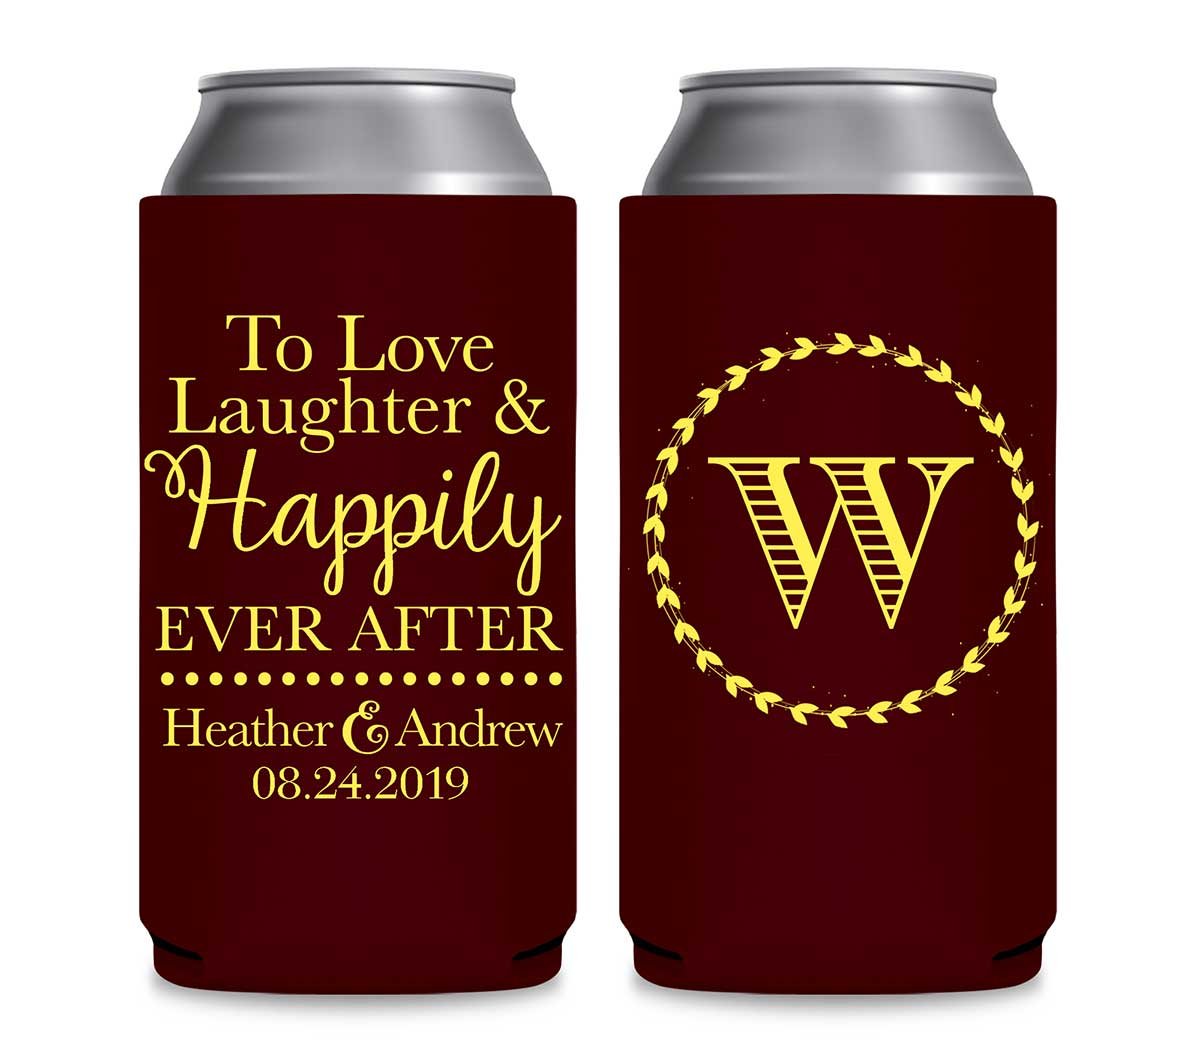 To Love Laughter & Happily Ever After 1A Foldable 12 oz Slim Can Koozies Wedding Gifts for Guests